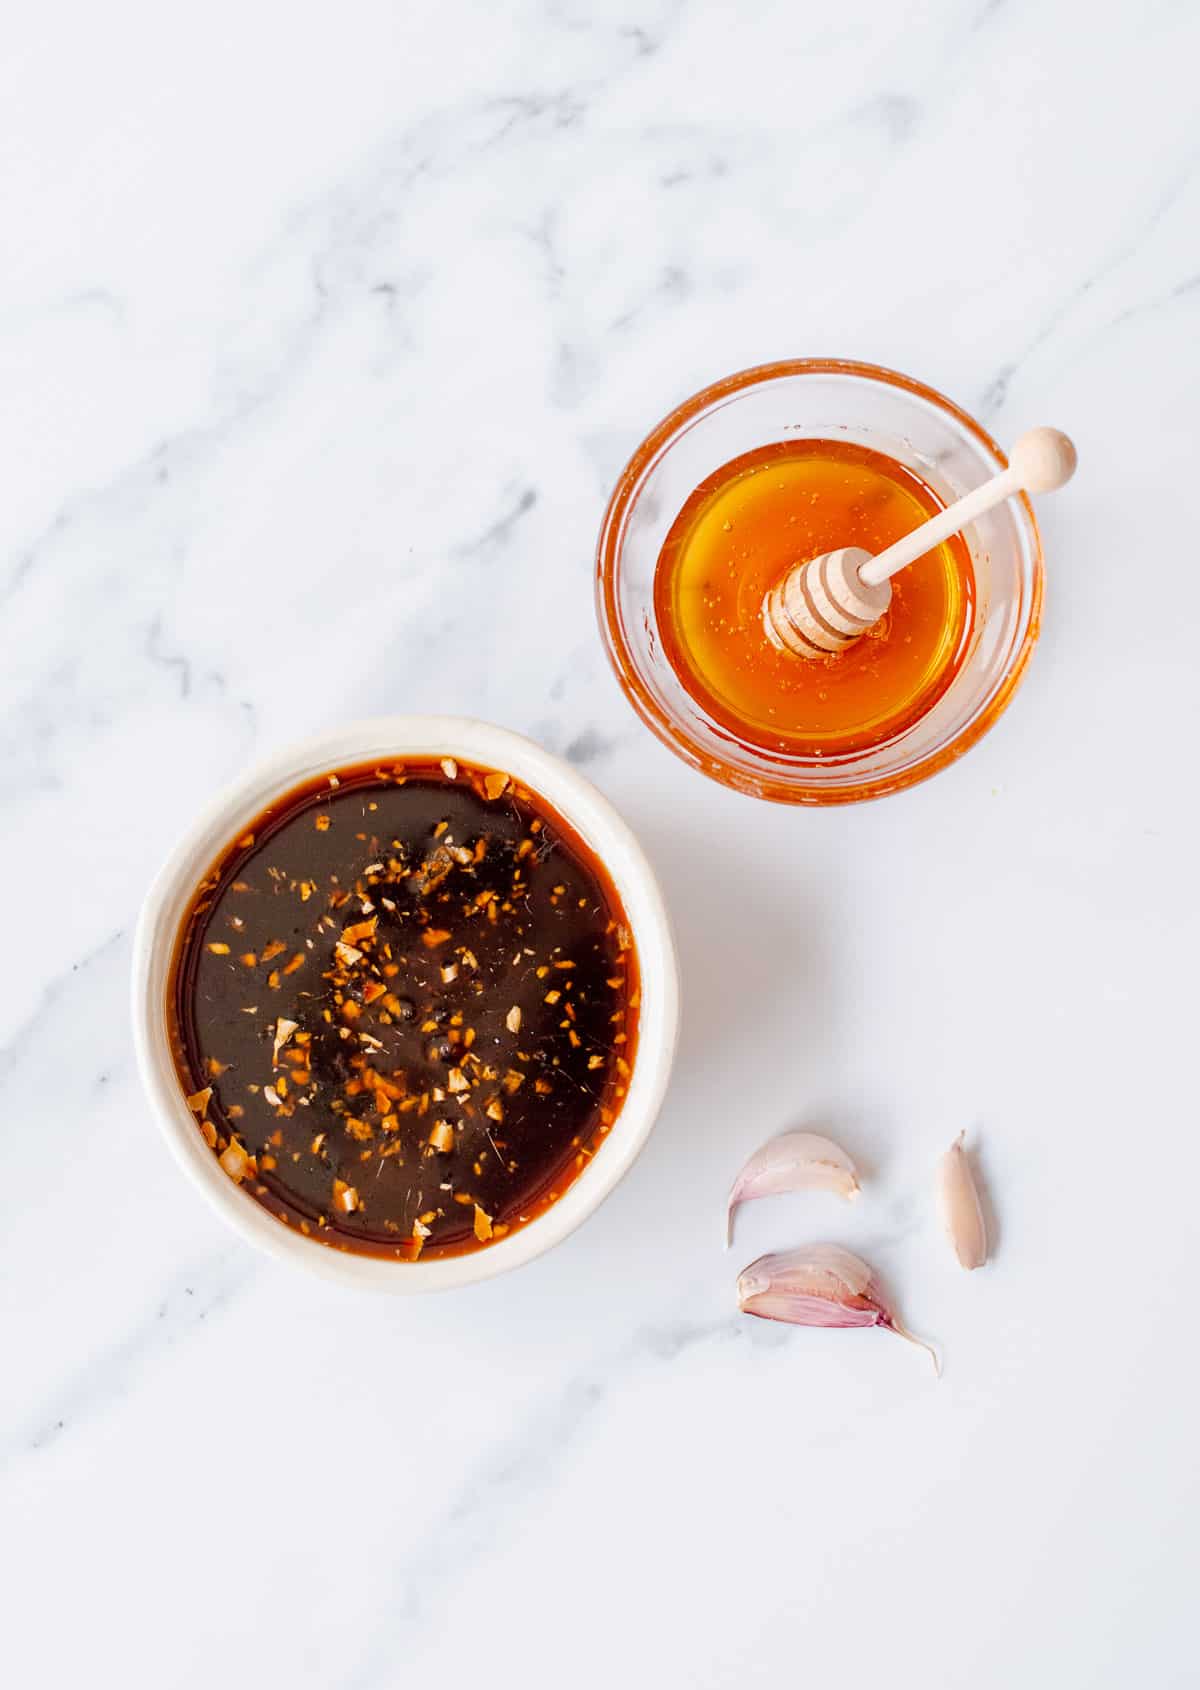 Overhead image of honey soy sauce, a bowl of honey and garlic cloves.